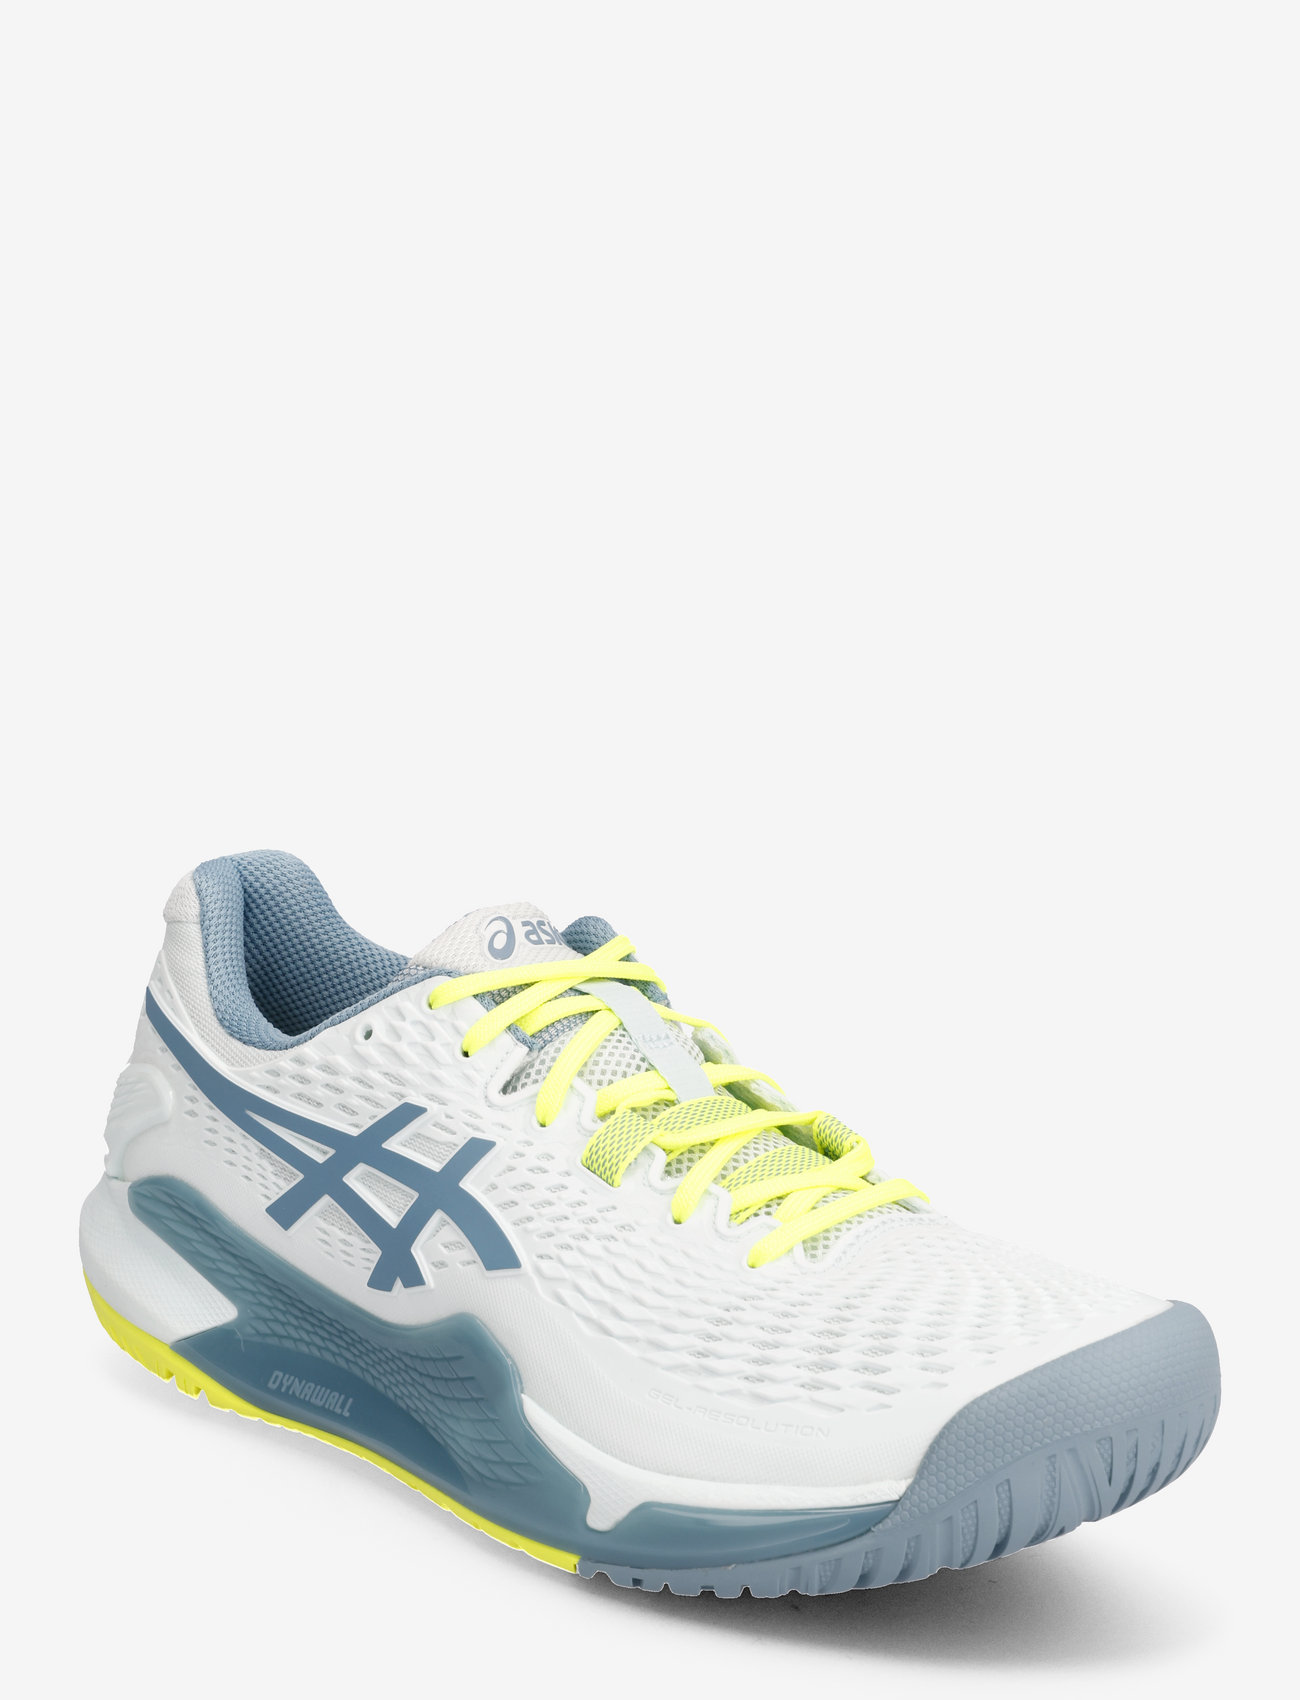 Asics - GEL-RESOLUTION 9 - racketsports shoes - soothing sea/gris blue - 0